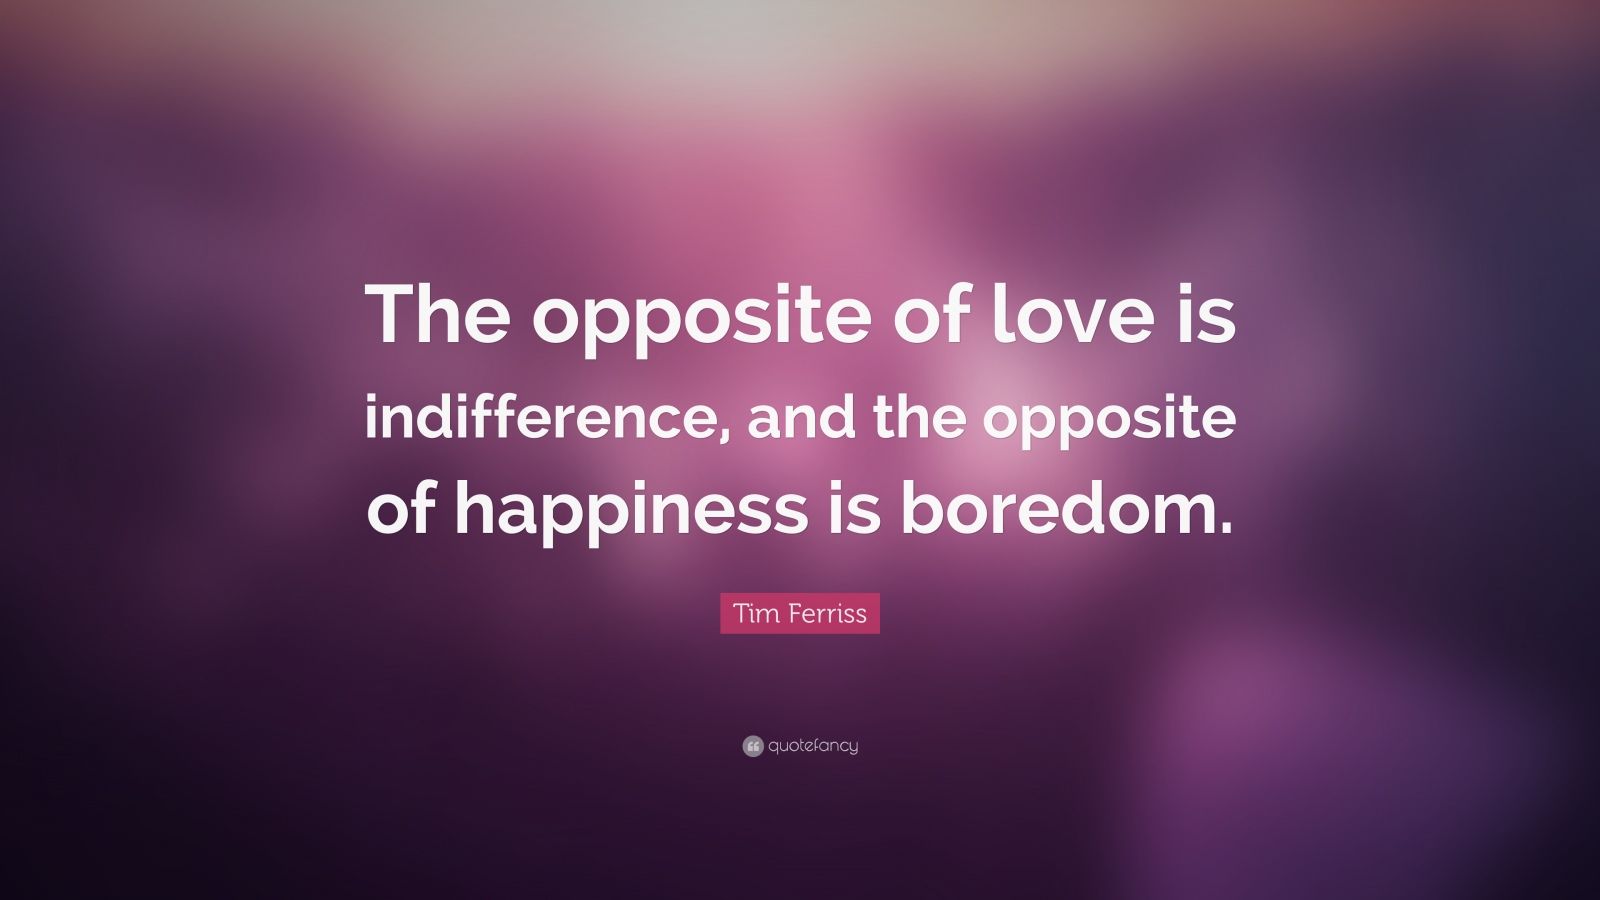 Tim Ferriss Quote: “The opposite of love is indifference, and the ...